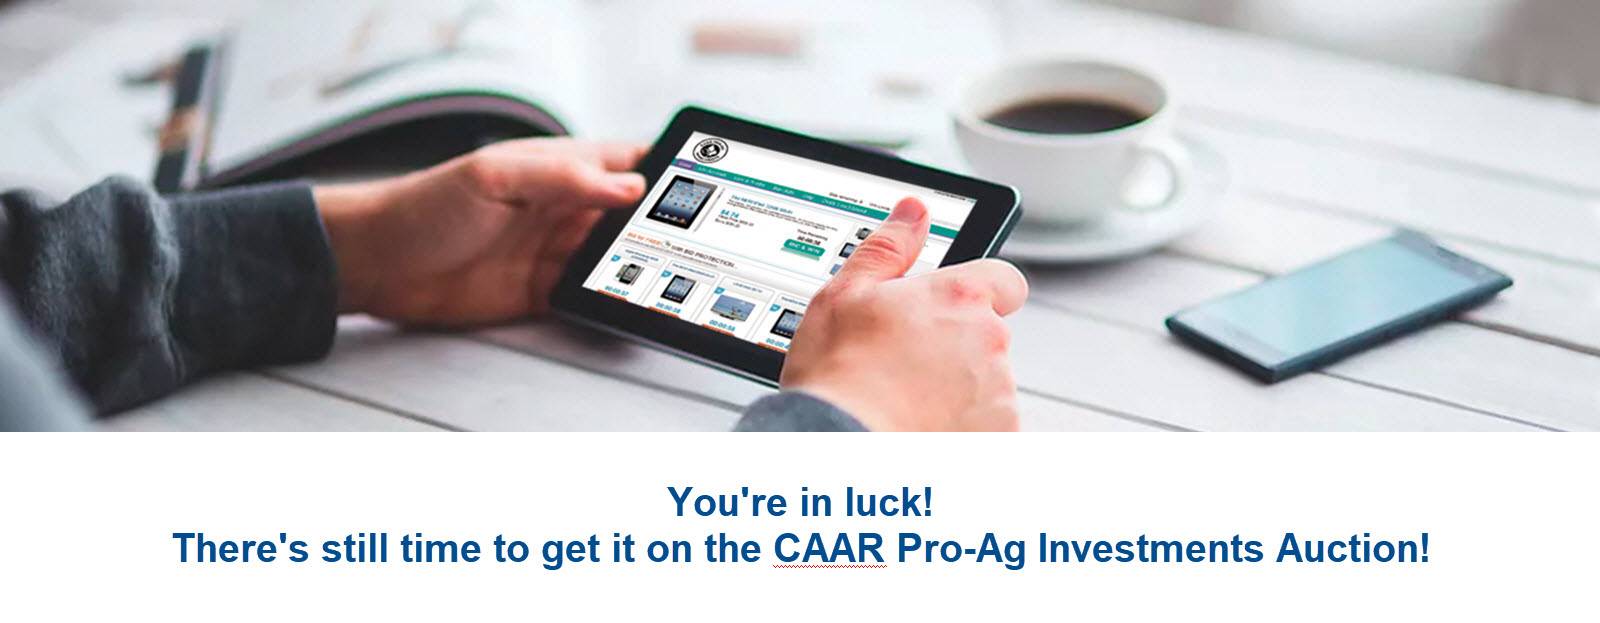 Still time to get it on the CAAR Pro-Ag Investments Auction